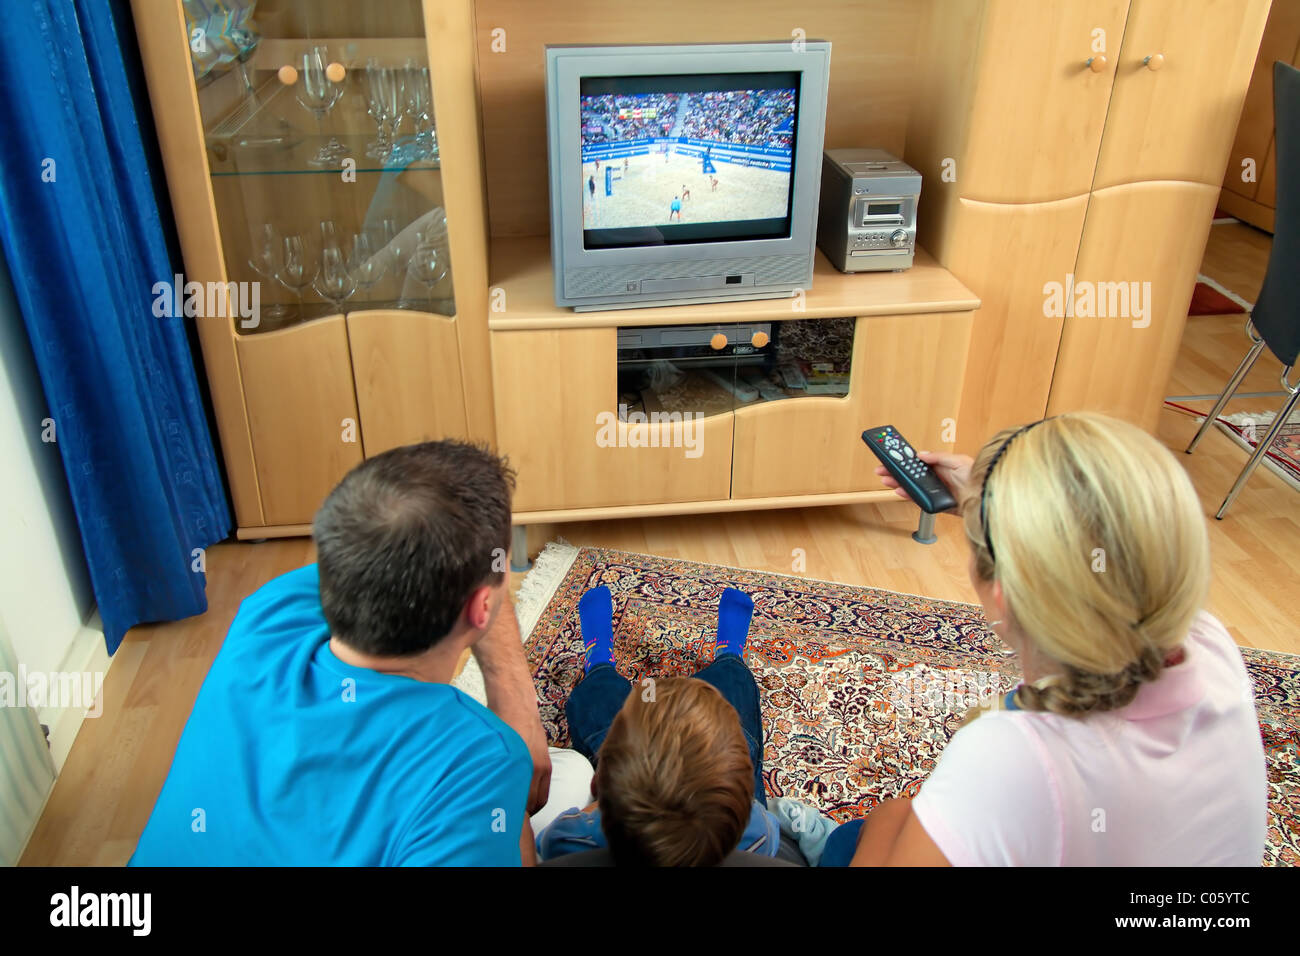 Family watching TV with TV Stock Photo